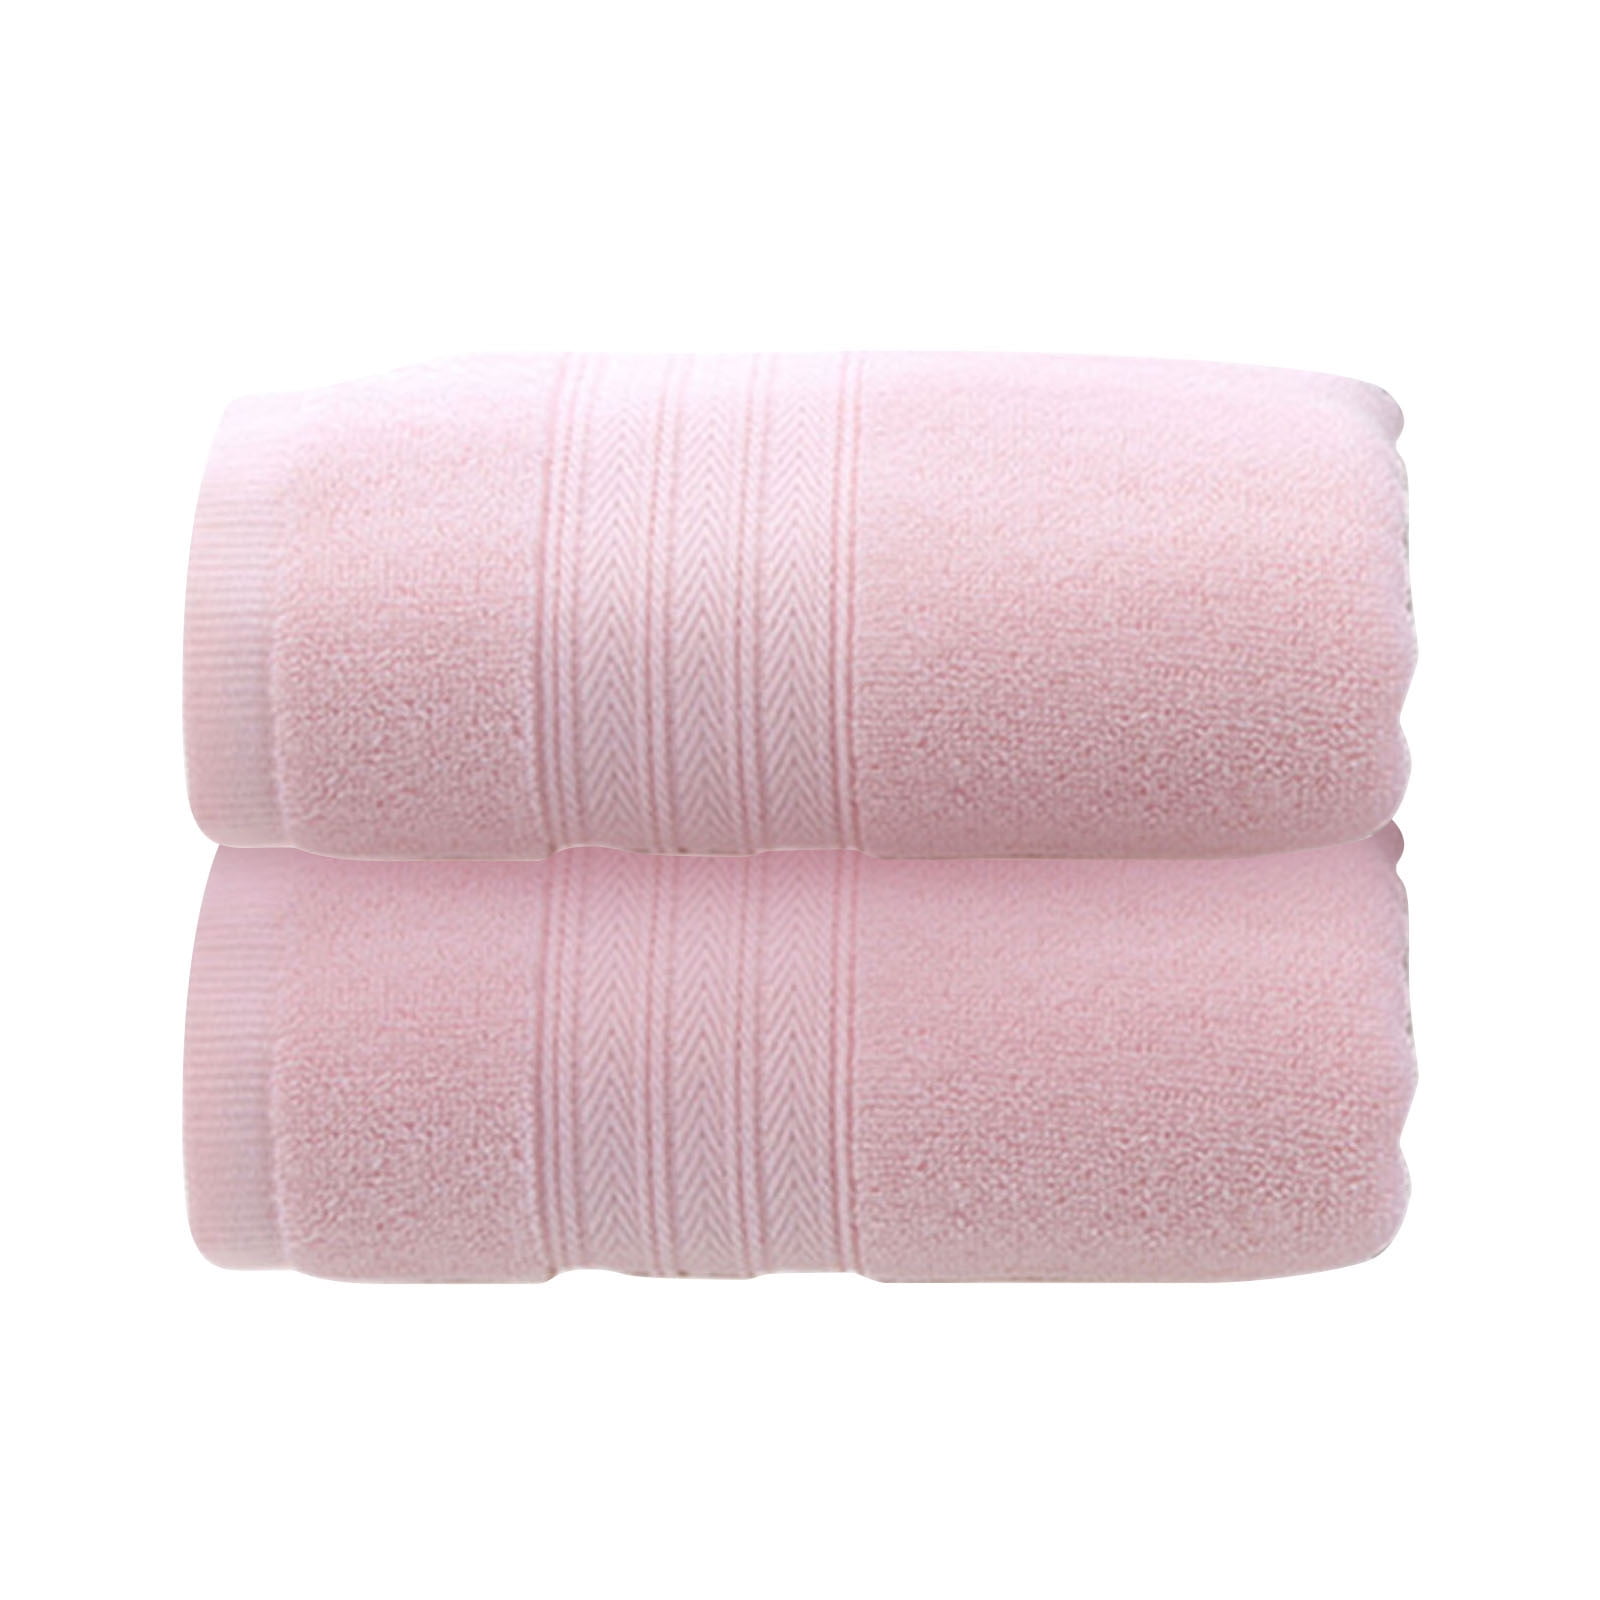 BrylaneHome 6 Piece 100% Cotton Terry Towel Set - 2 Bath Towels 2 Hand  Towels 2 Washcloths, Soft and Plush Highly Absorbent - Raspberry Pink 